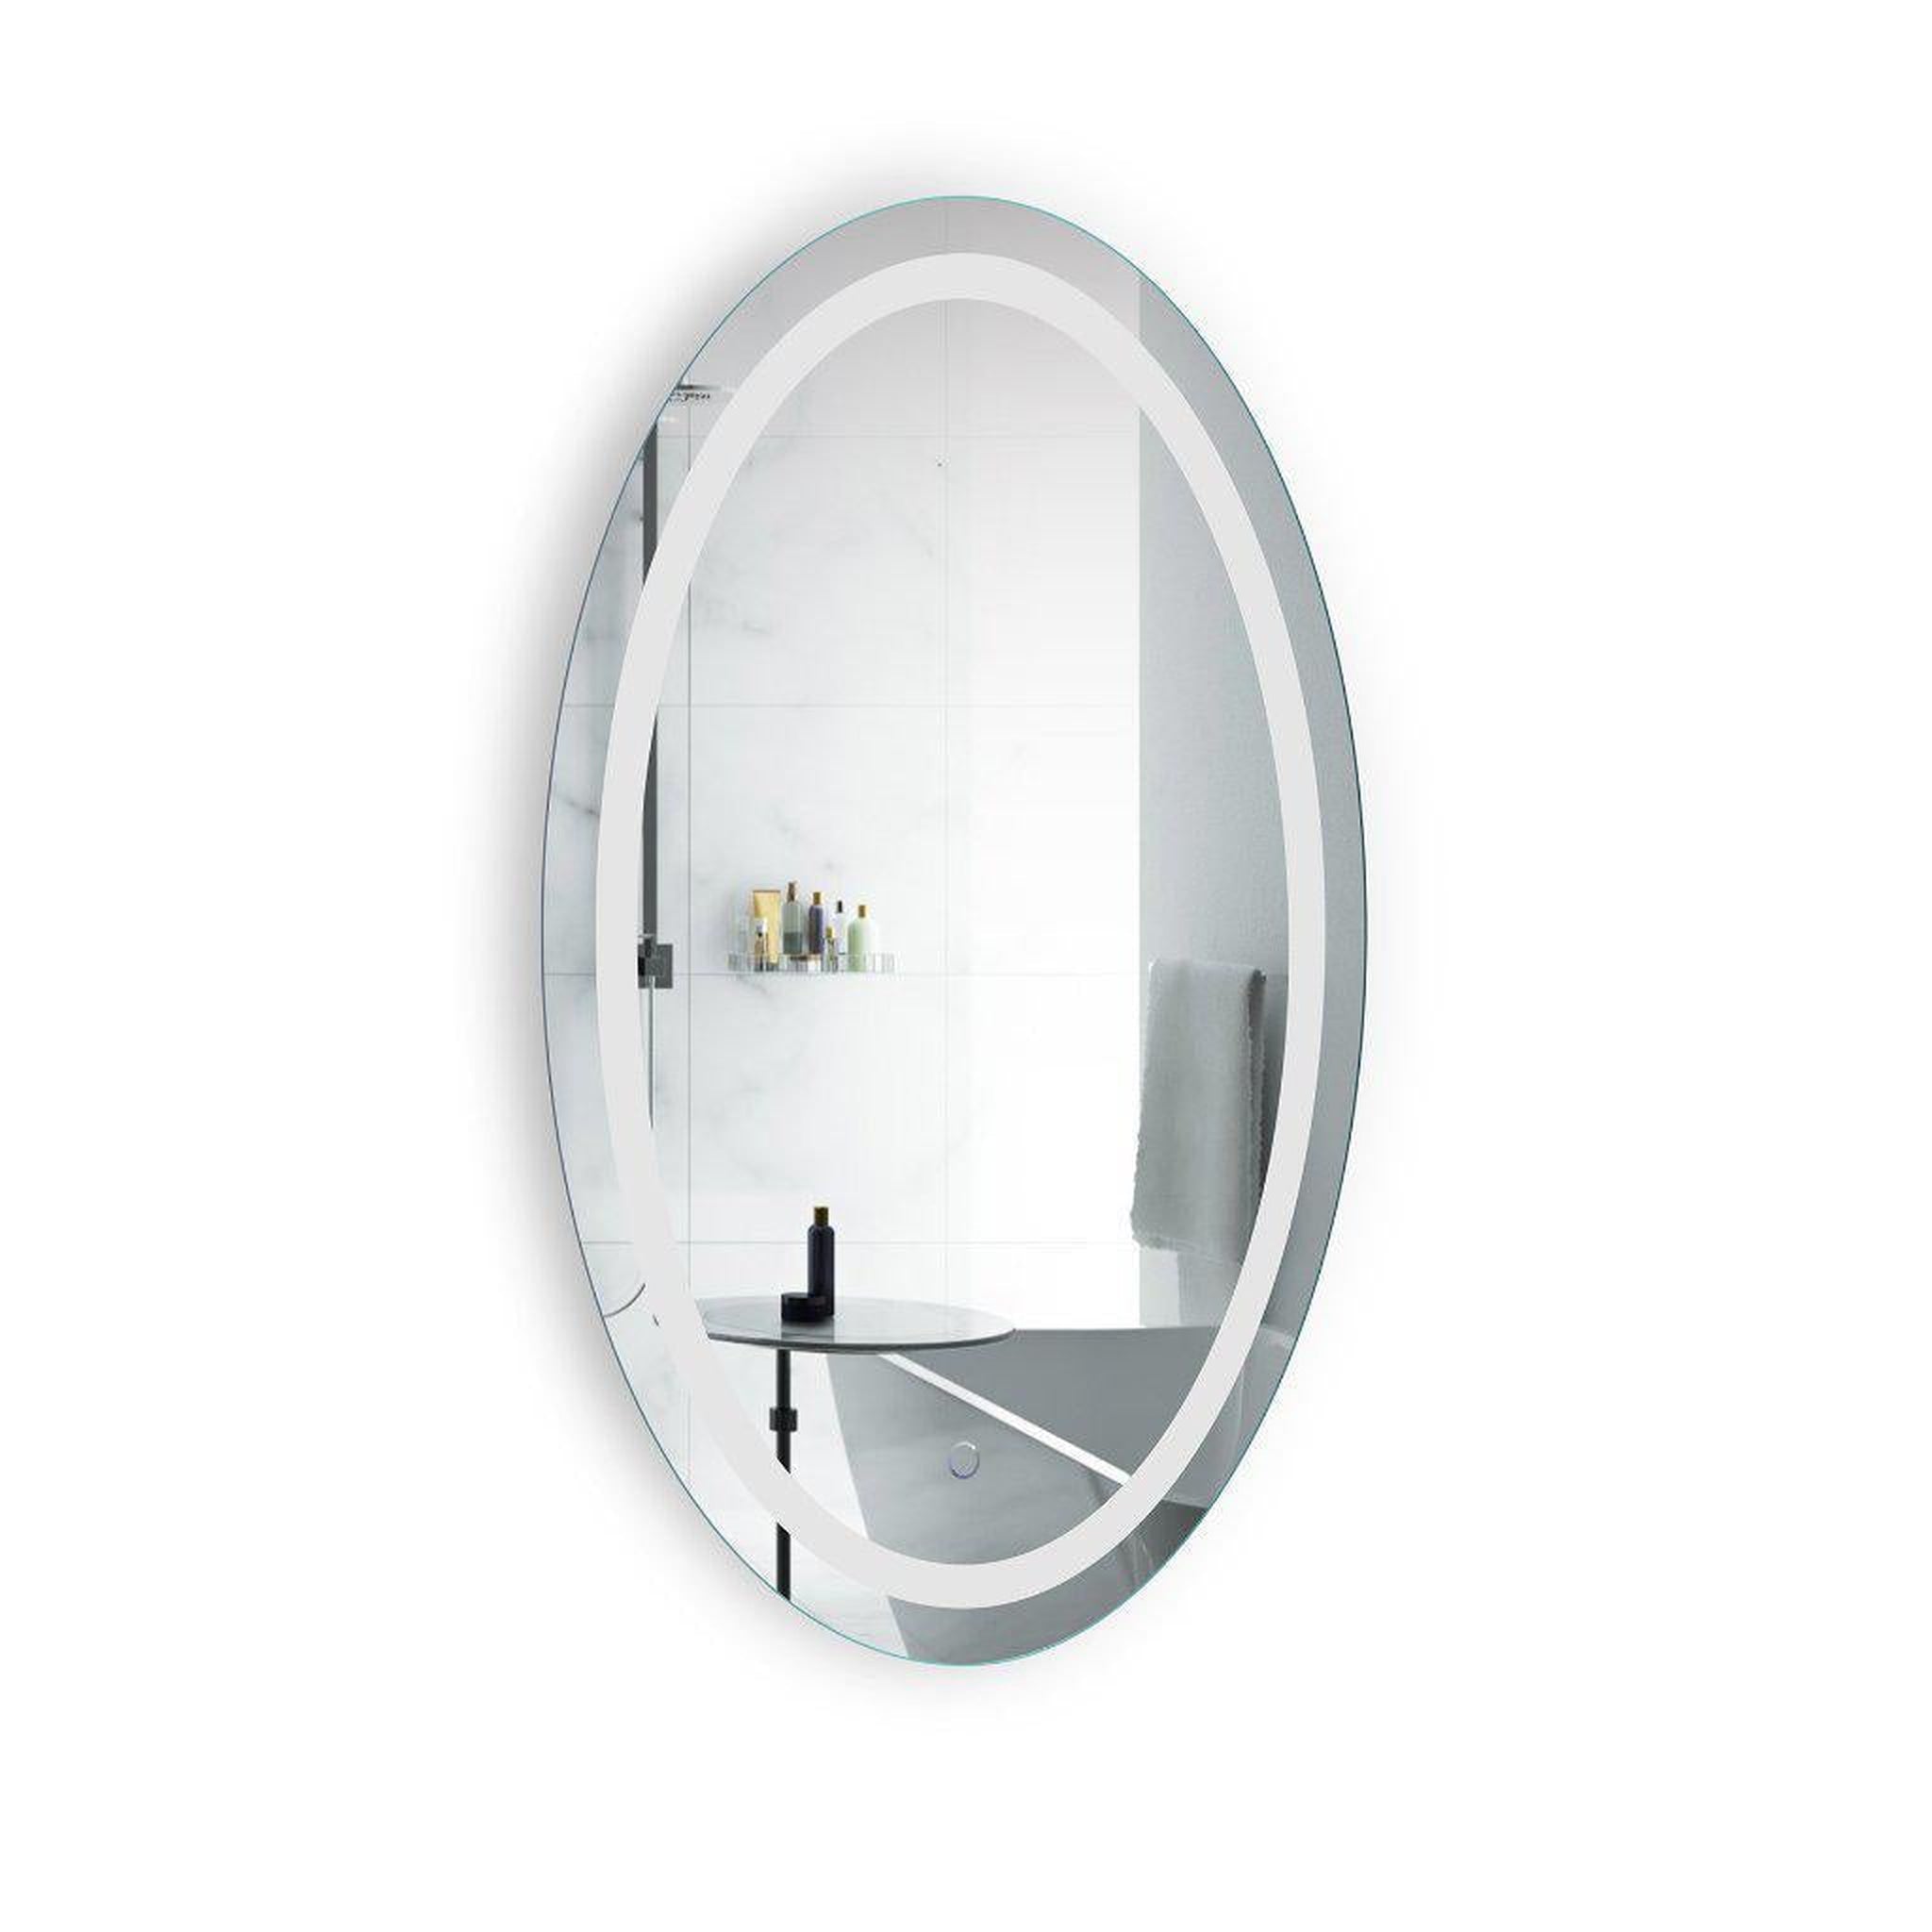 Krugg Reflections, Krugg Reflections Icon 24” x 42” 5000K Oval Wall-Mounted Illuminated Silver Backed LED  Mirror With Built-in Defogger and Touch Sensor On/Off Built-in Dimmer